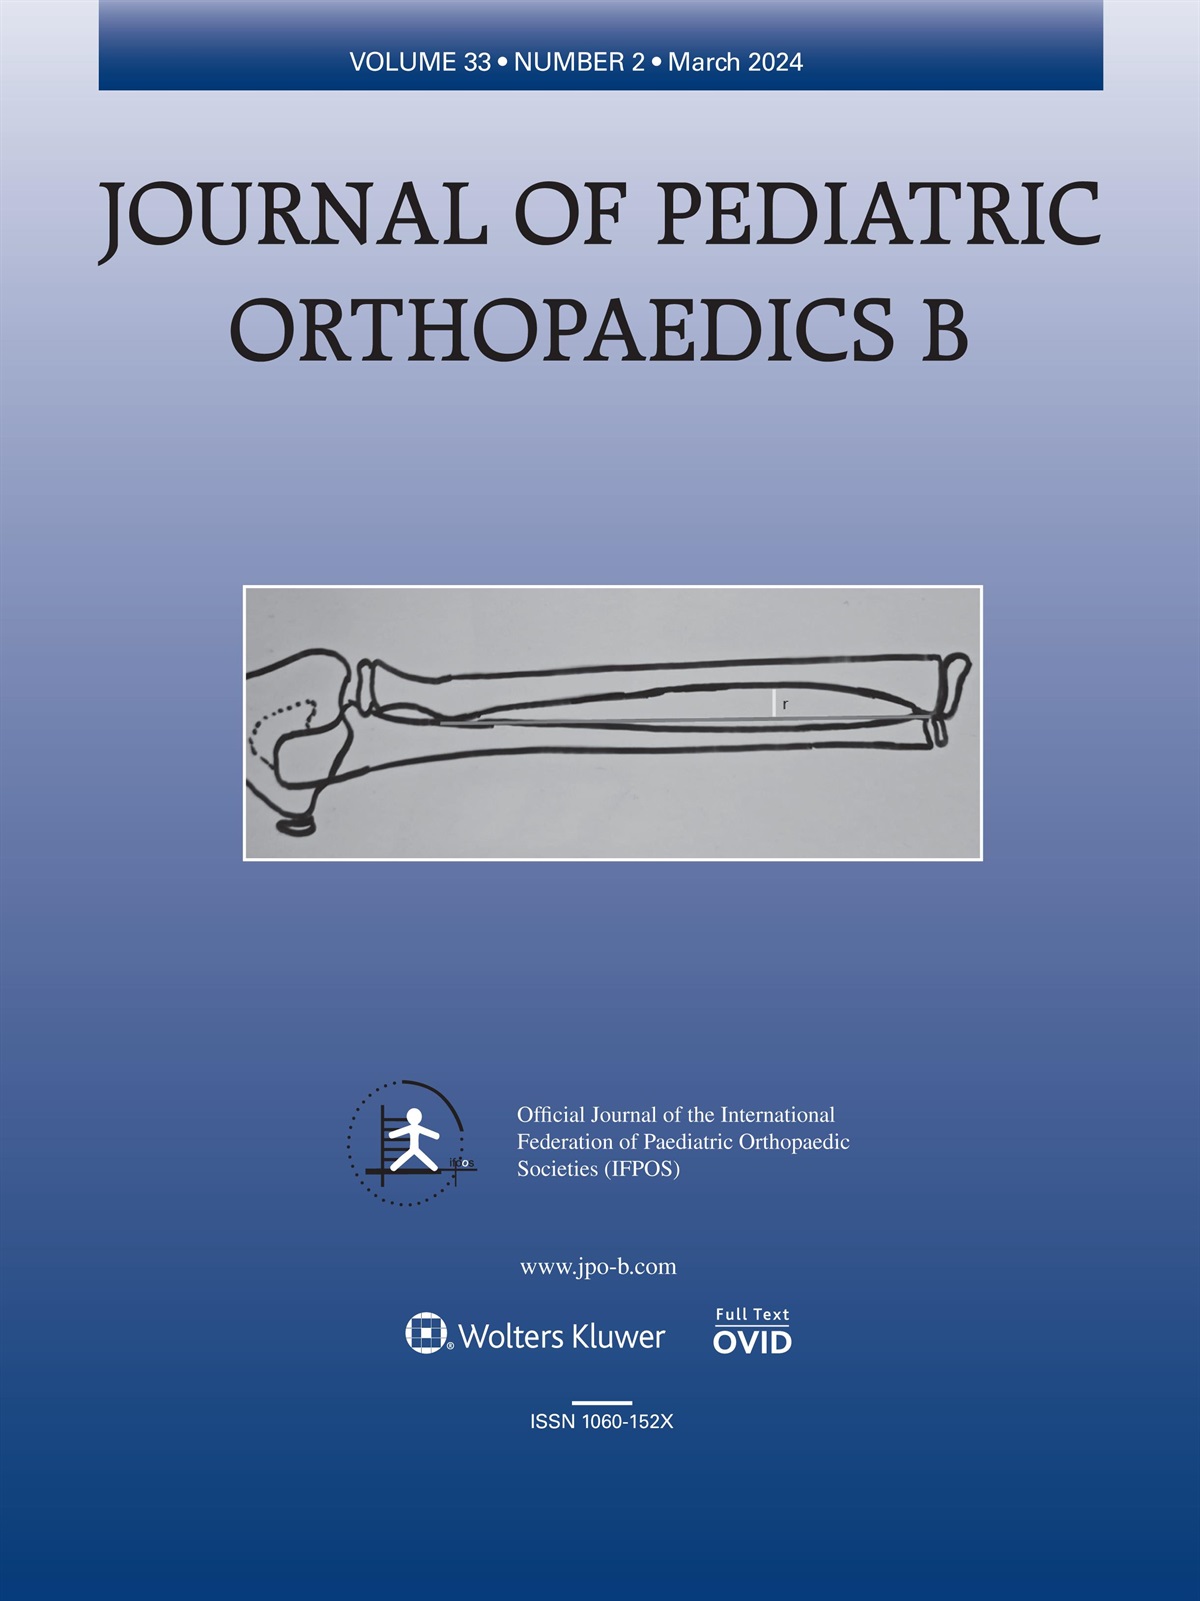 Incidence, risk factors, and consequences of radiographic pin migration after pinning of pediatric supracondylar humeral fractures